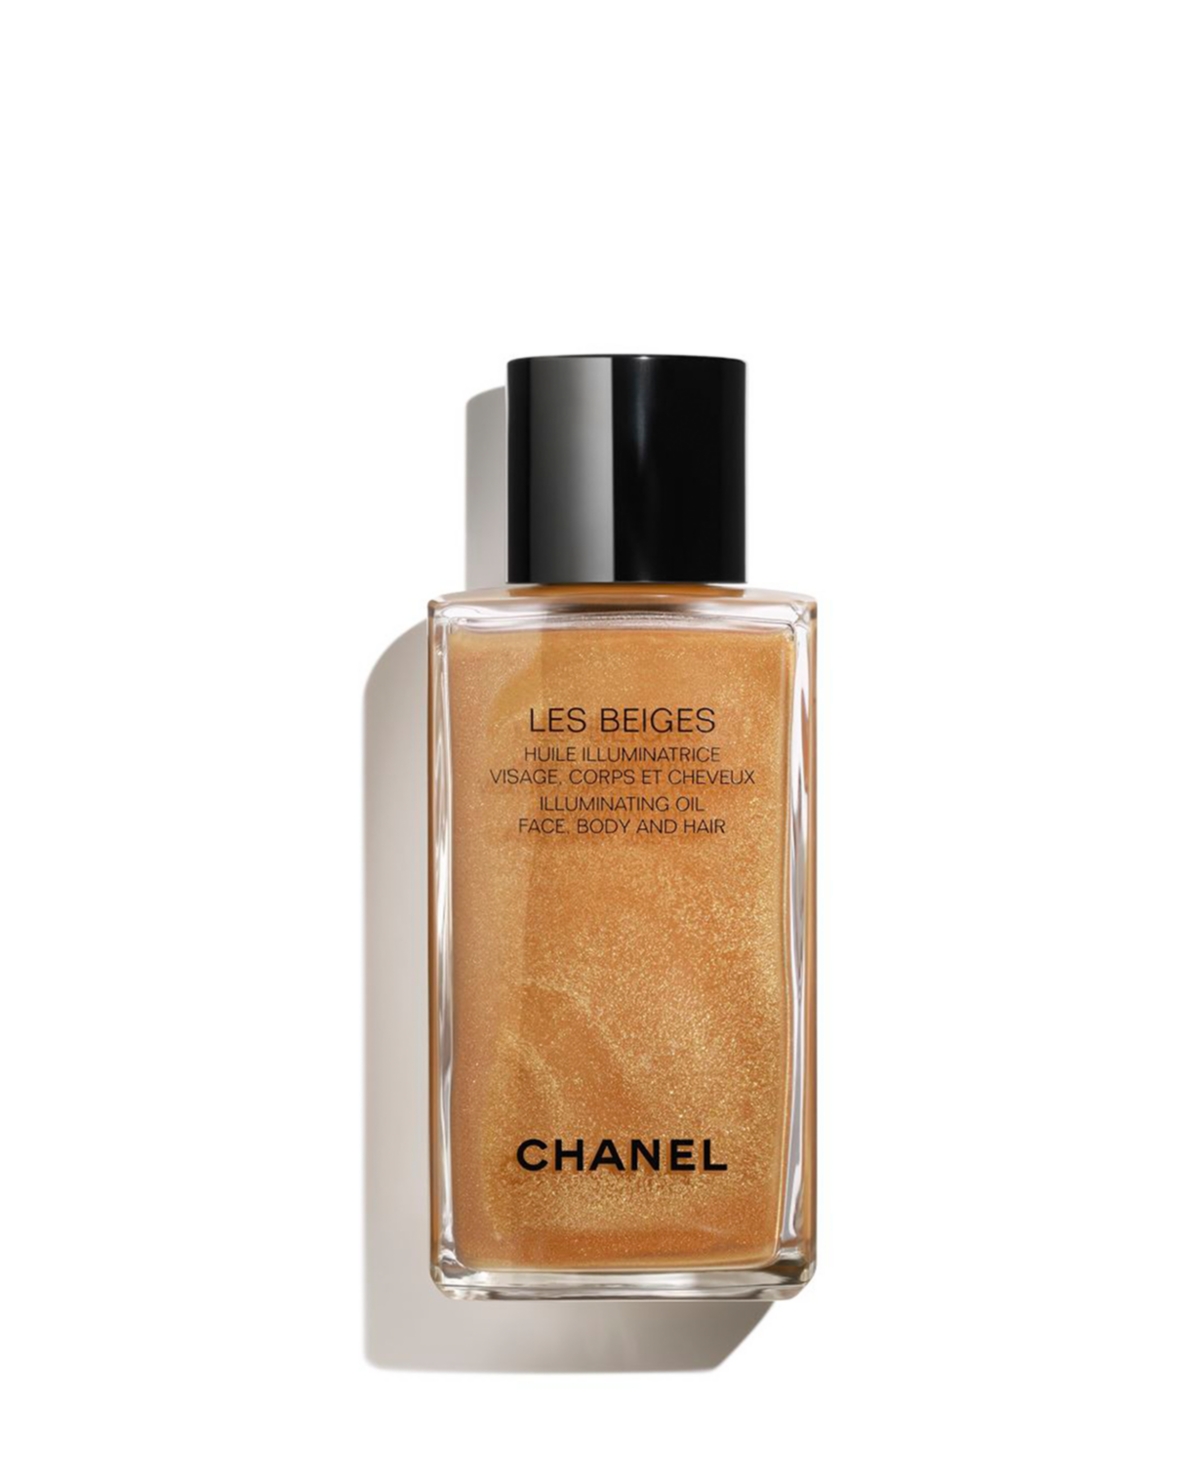 Chanel @CHANEL BEAUTY LES BEIGES 😍 #chanel #chanellesbeiges #chanelb